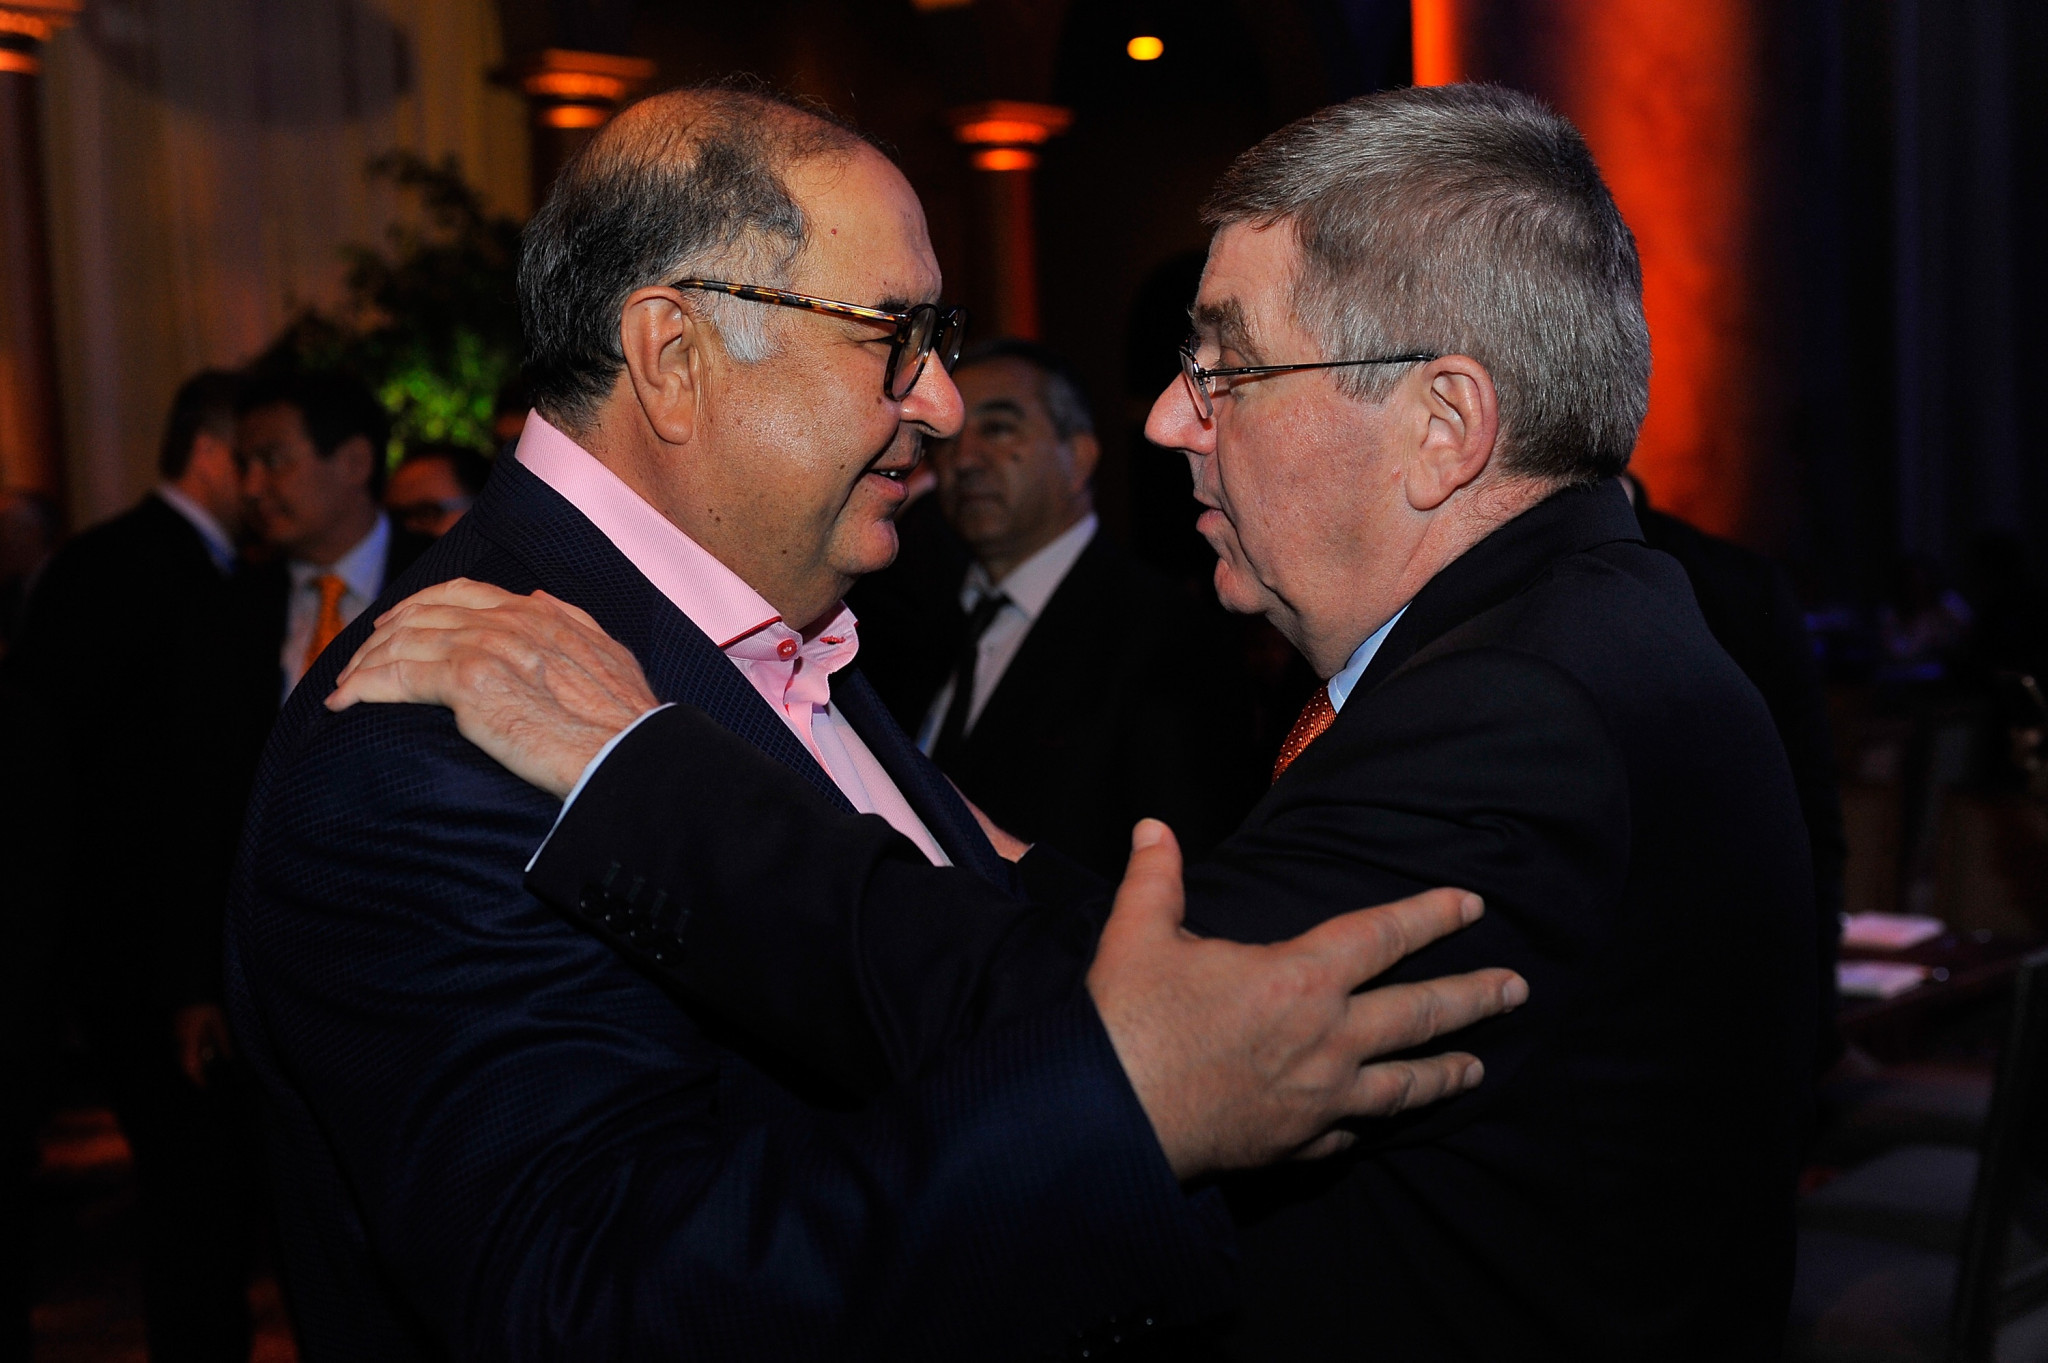 Alisher Usmanov has donated a significant amount of money to the FIE since becoming head of the organisation in 2008 ©Getty Images